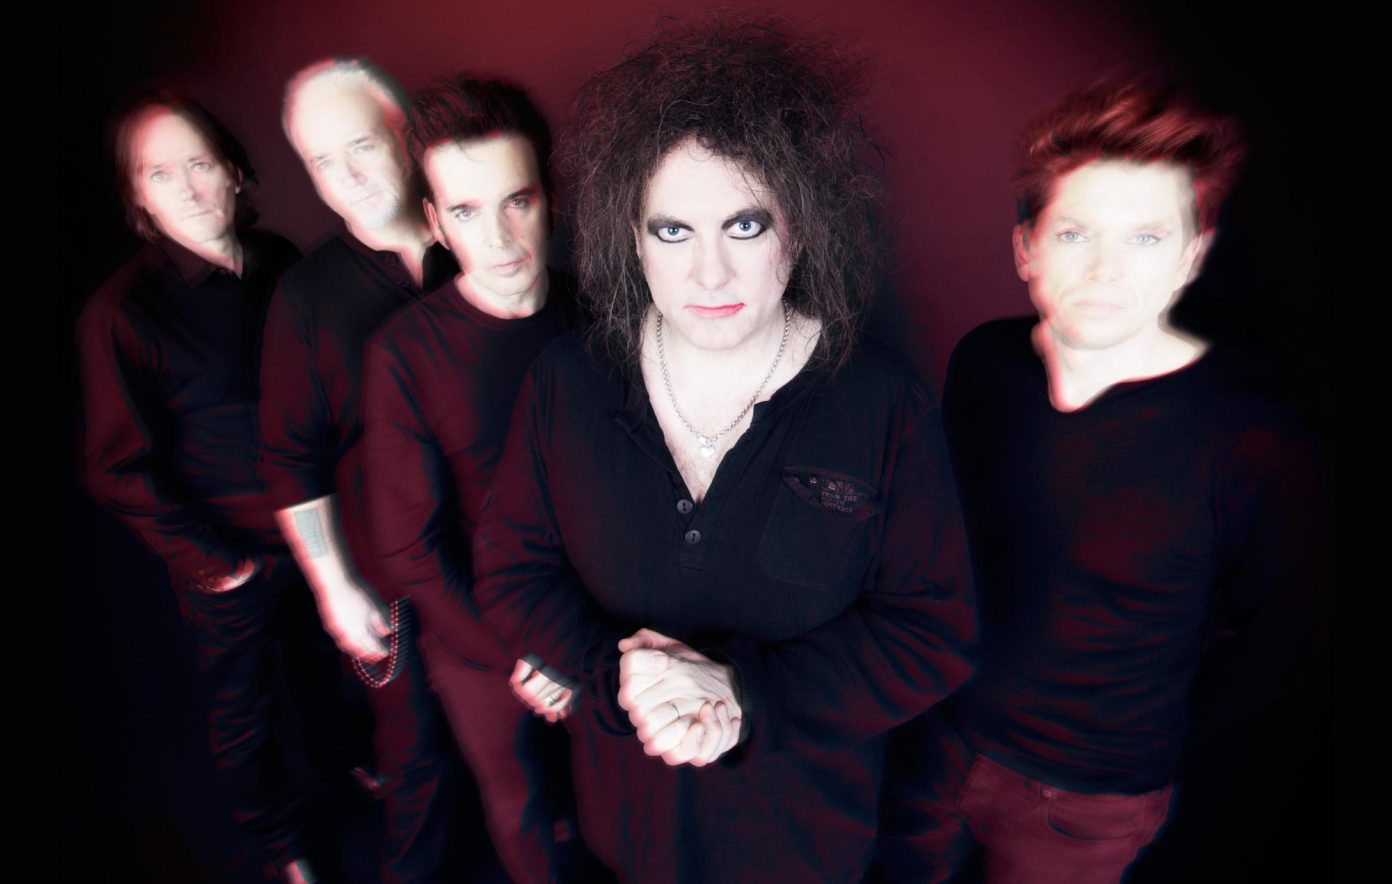 The Cure's Robert Smith teases arrival of band's new album